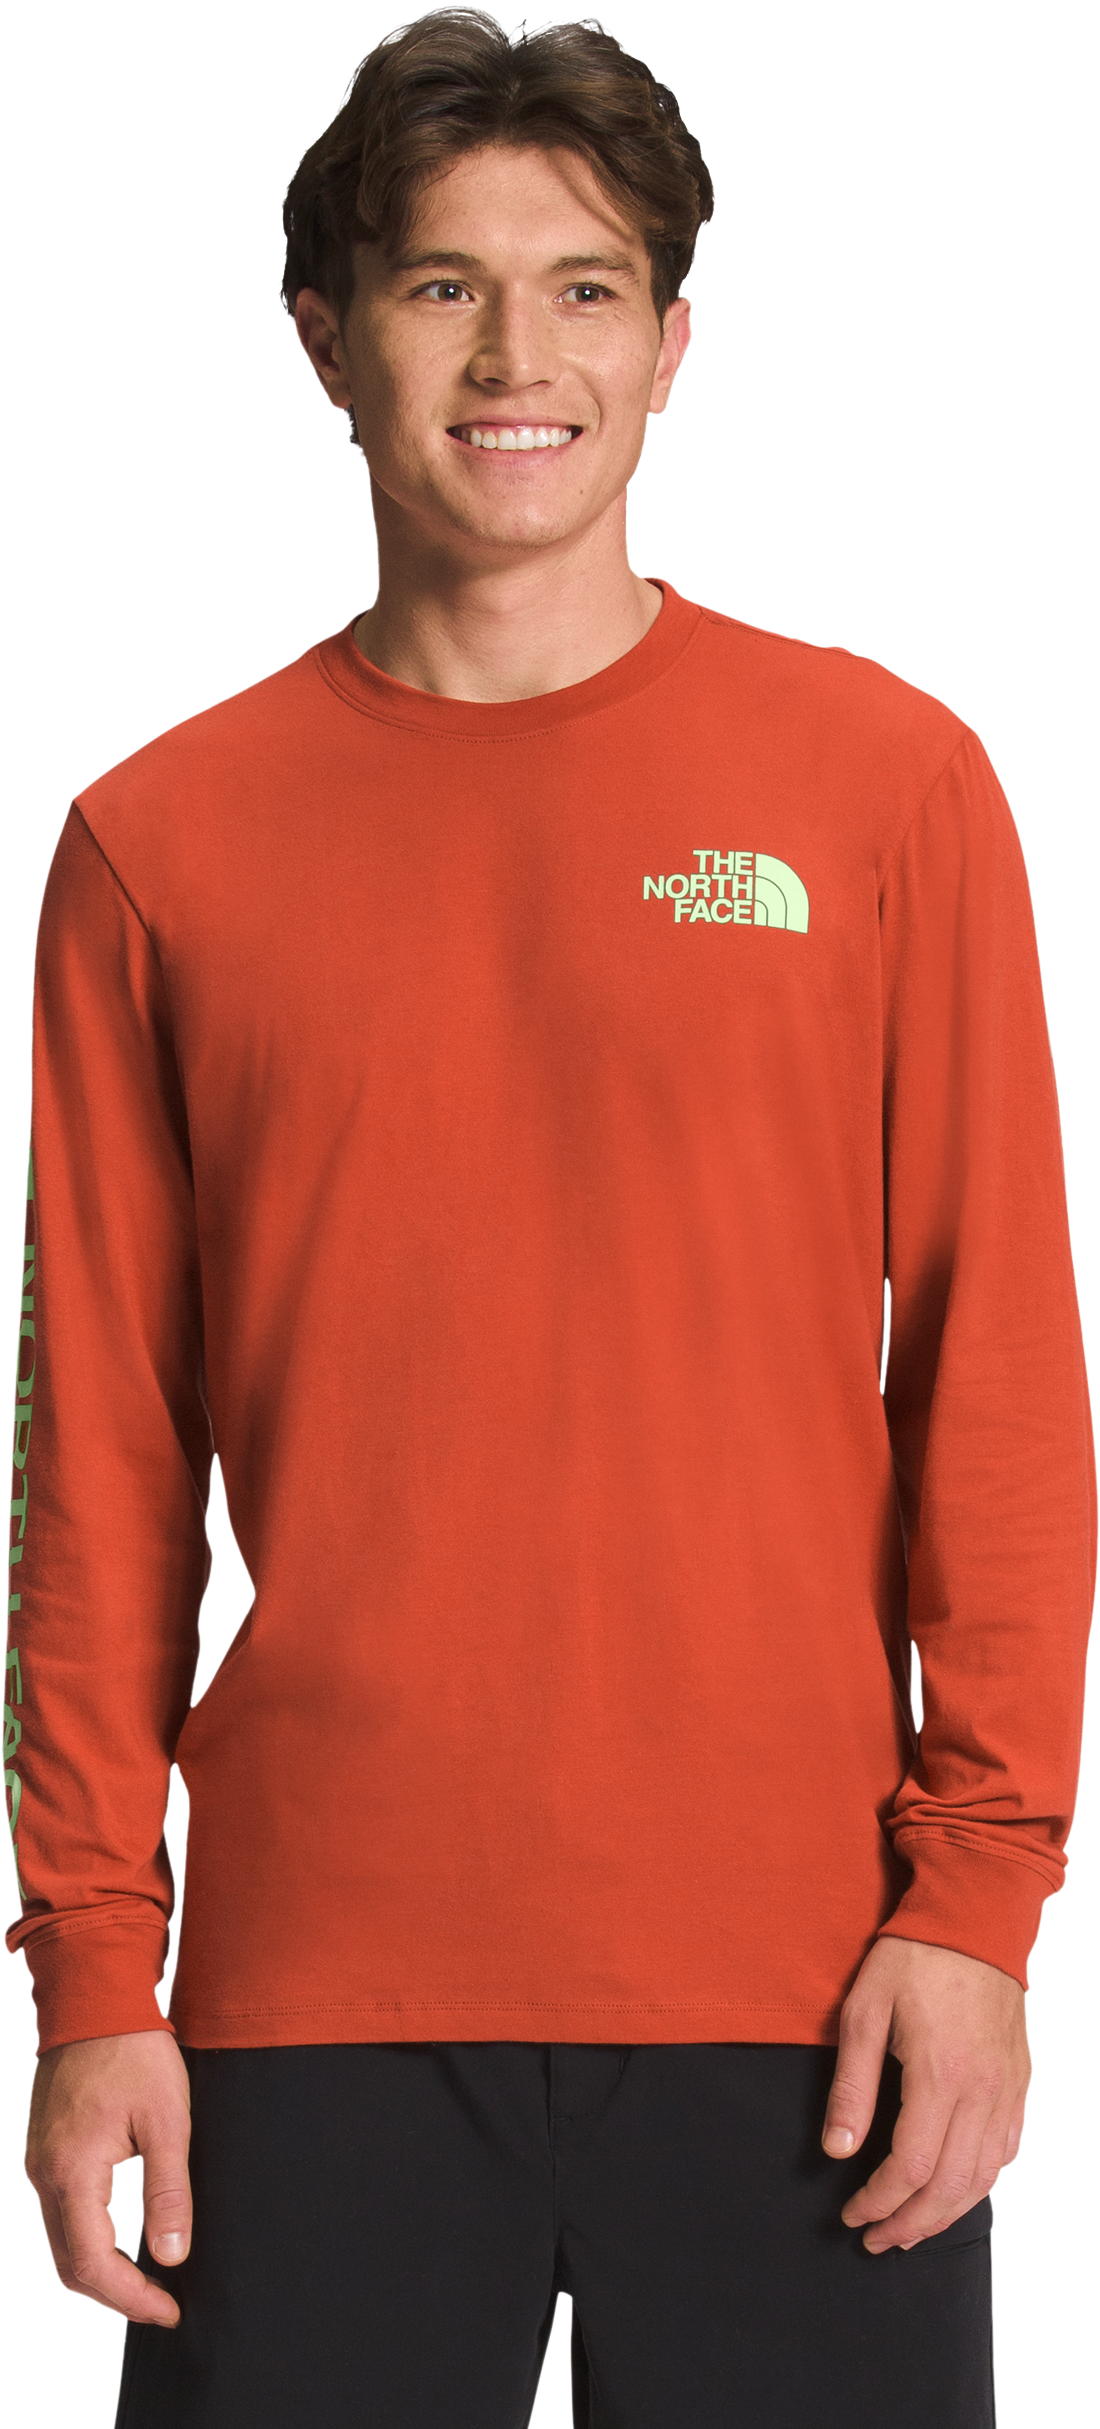 The North Face Hit Graphic Long-Sleeve T-Shirt for Men - Rust Bronze/Lime Cream - XL